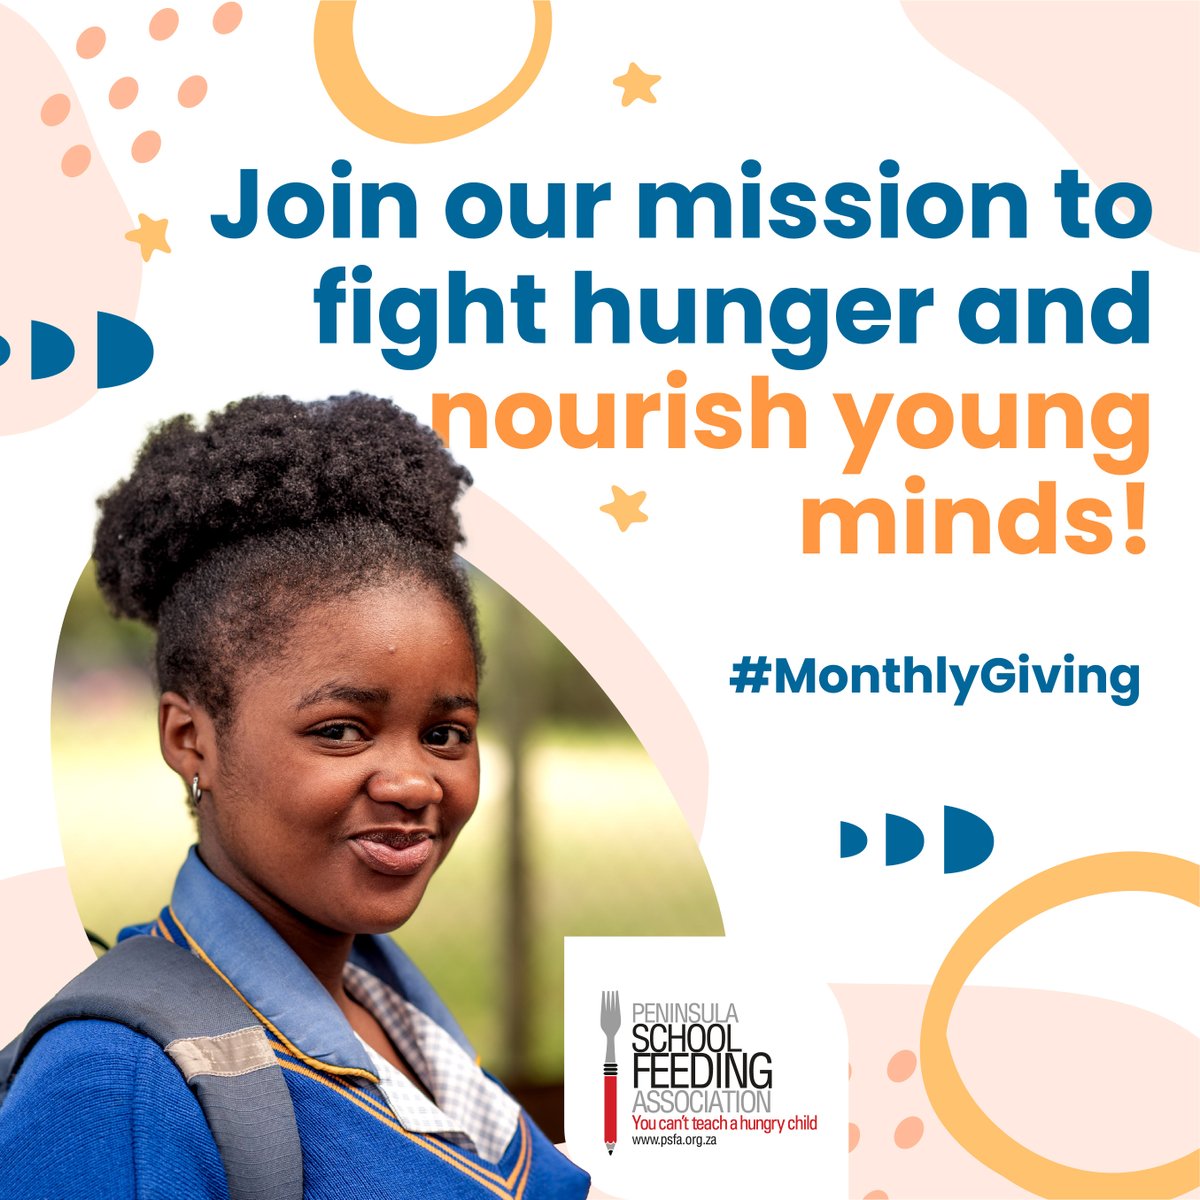 Join our mission to fight hunger and nourish young minds!

Pledge a monthly donation to the Peninsula School Feeding Association and make a lasting impact on children affected by poverty.

Set up your monthly giving here: ow.ly/goUk50Rc8OK

#MonthlyGiving #LastingImpact